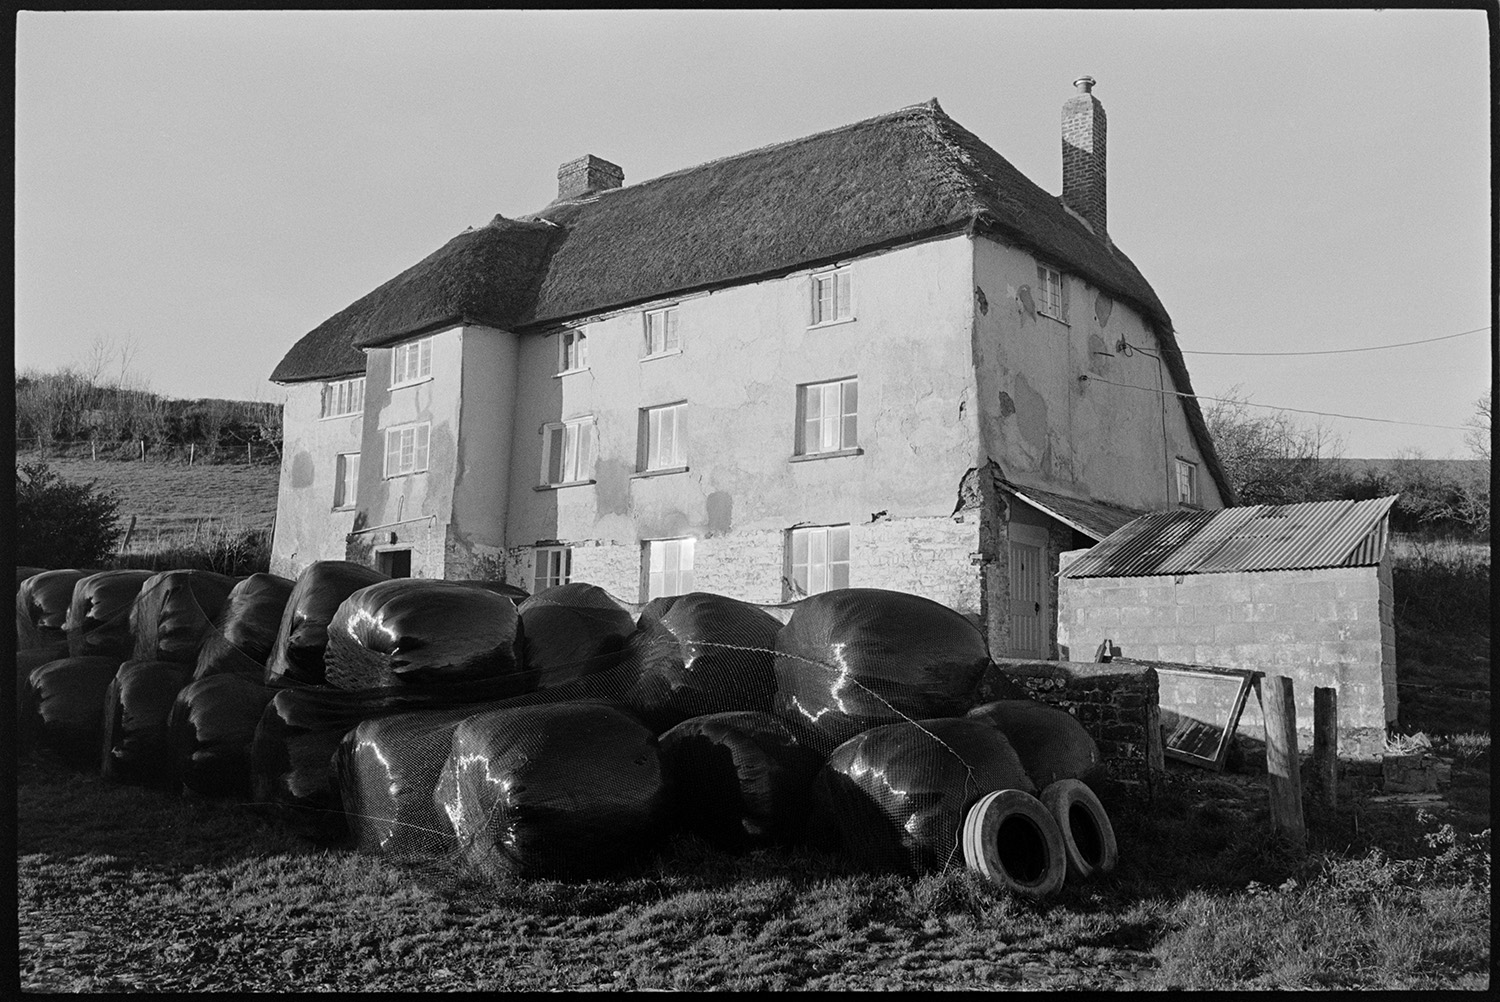 Cob and thatch farmhouse, three stories with polythene bales piled in front. 
[A three storey cob and thatch farmhouse at Brookland, Chulmleigh. Polythene covered bales of hay or silage are stacked up in front of the farmhouse.]